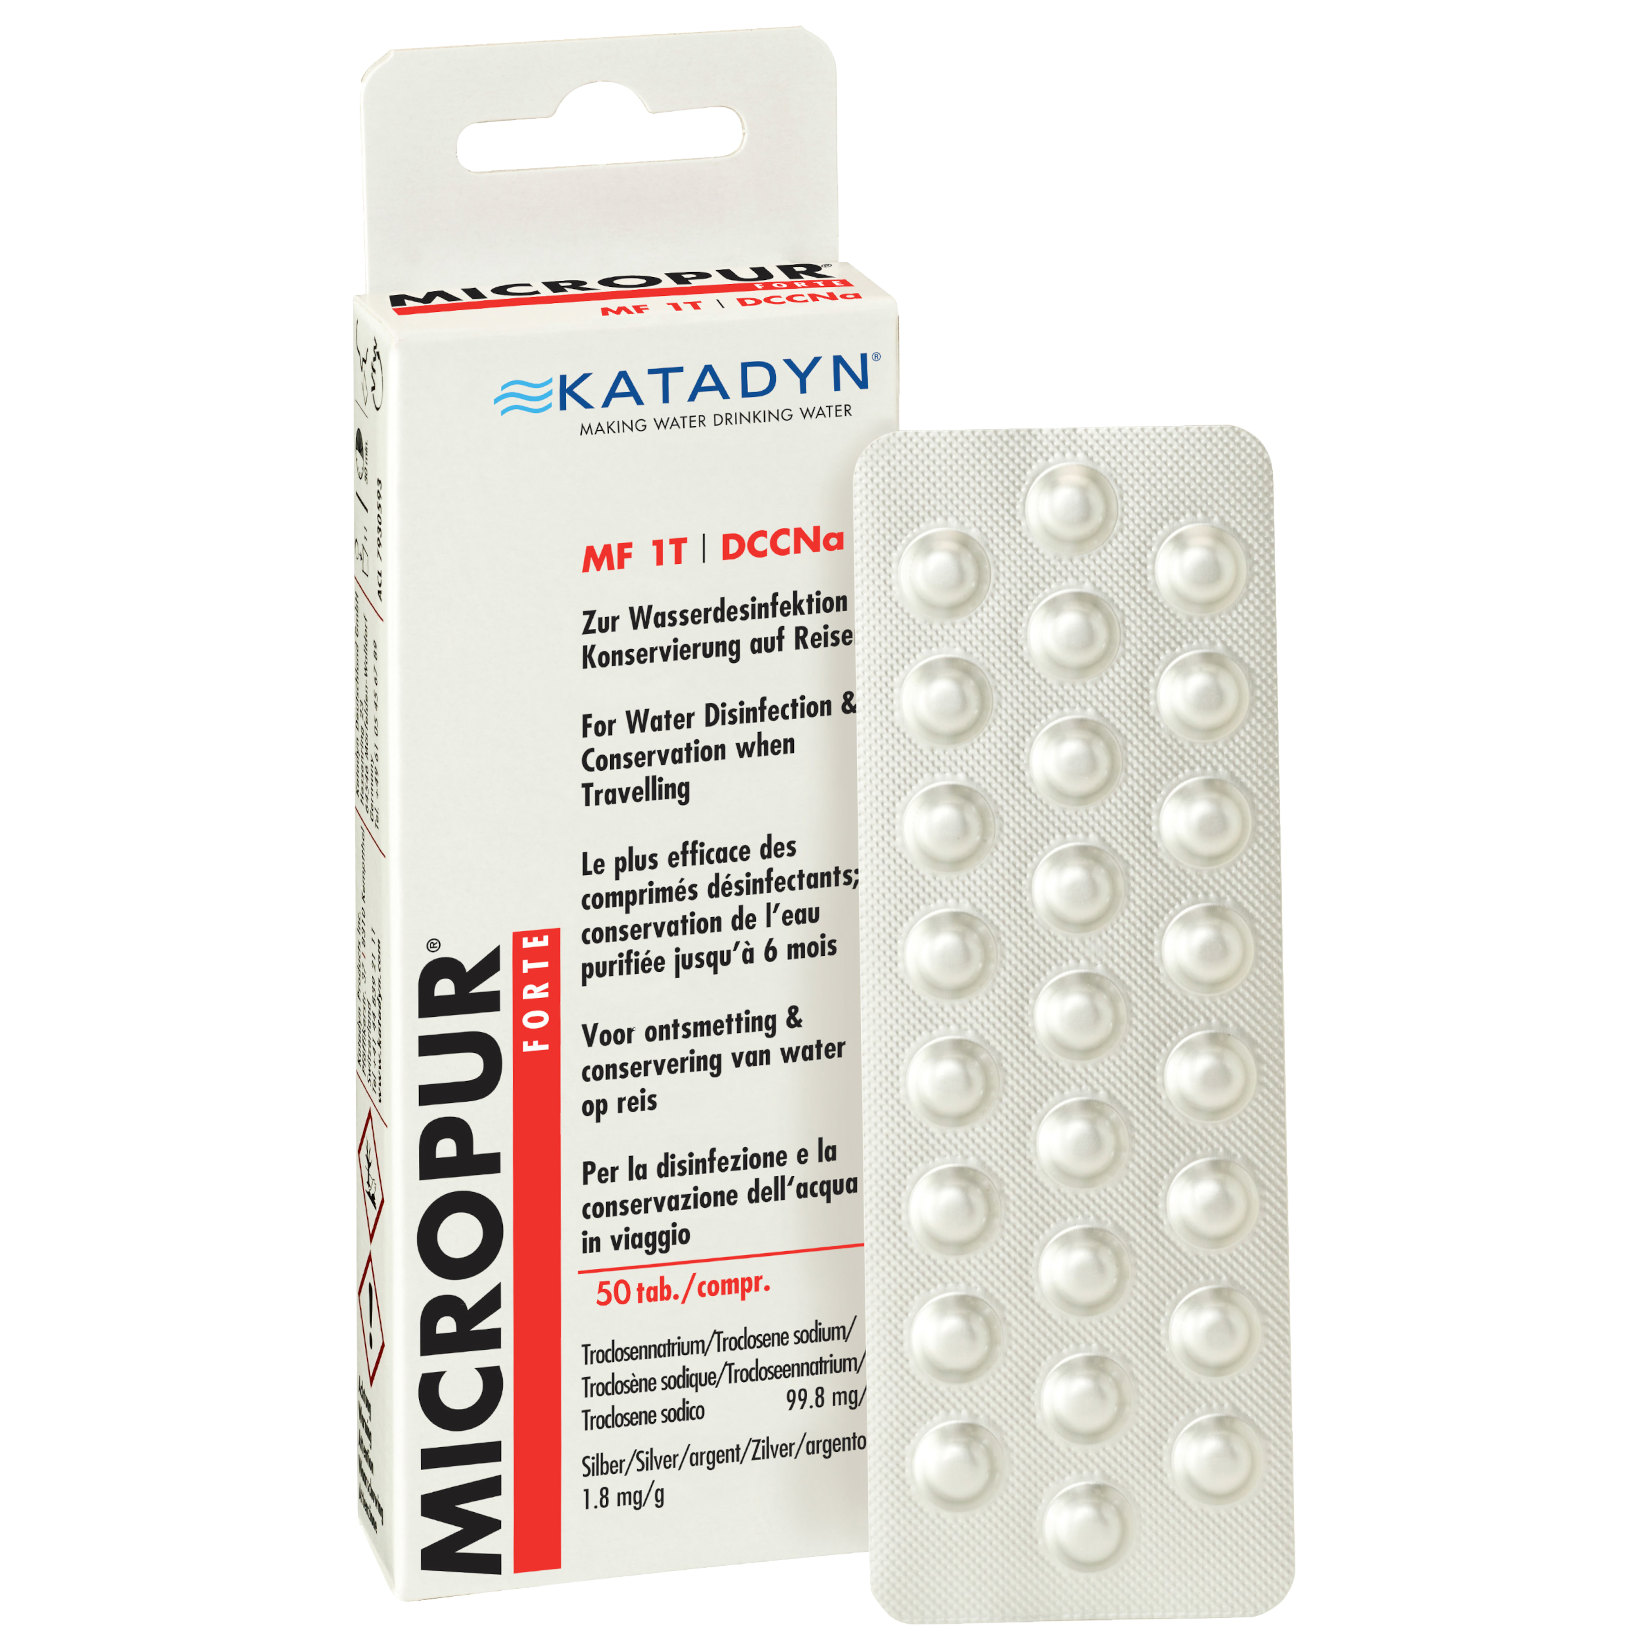 Productfoto van Katadyn Micropur Forte MF 1T Water Disinfection - 50 Tablets